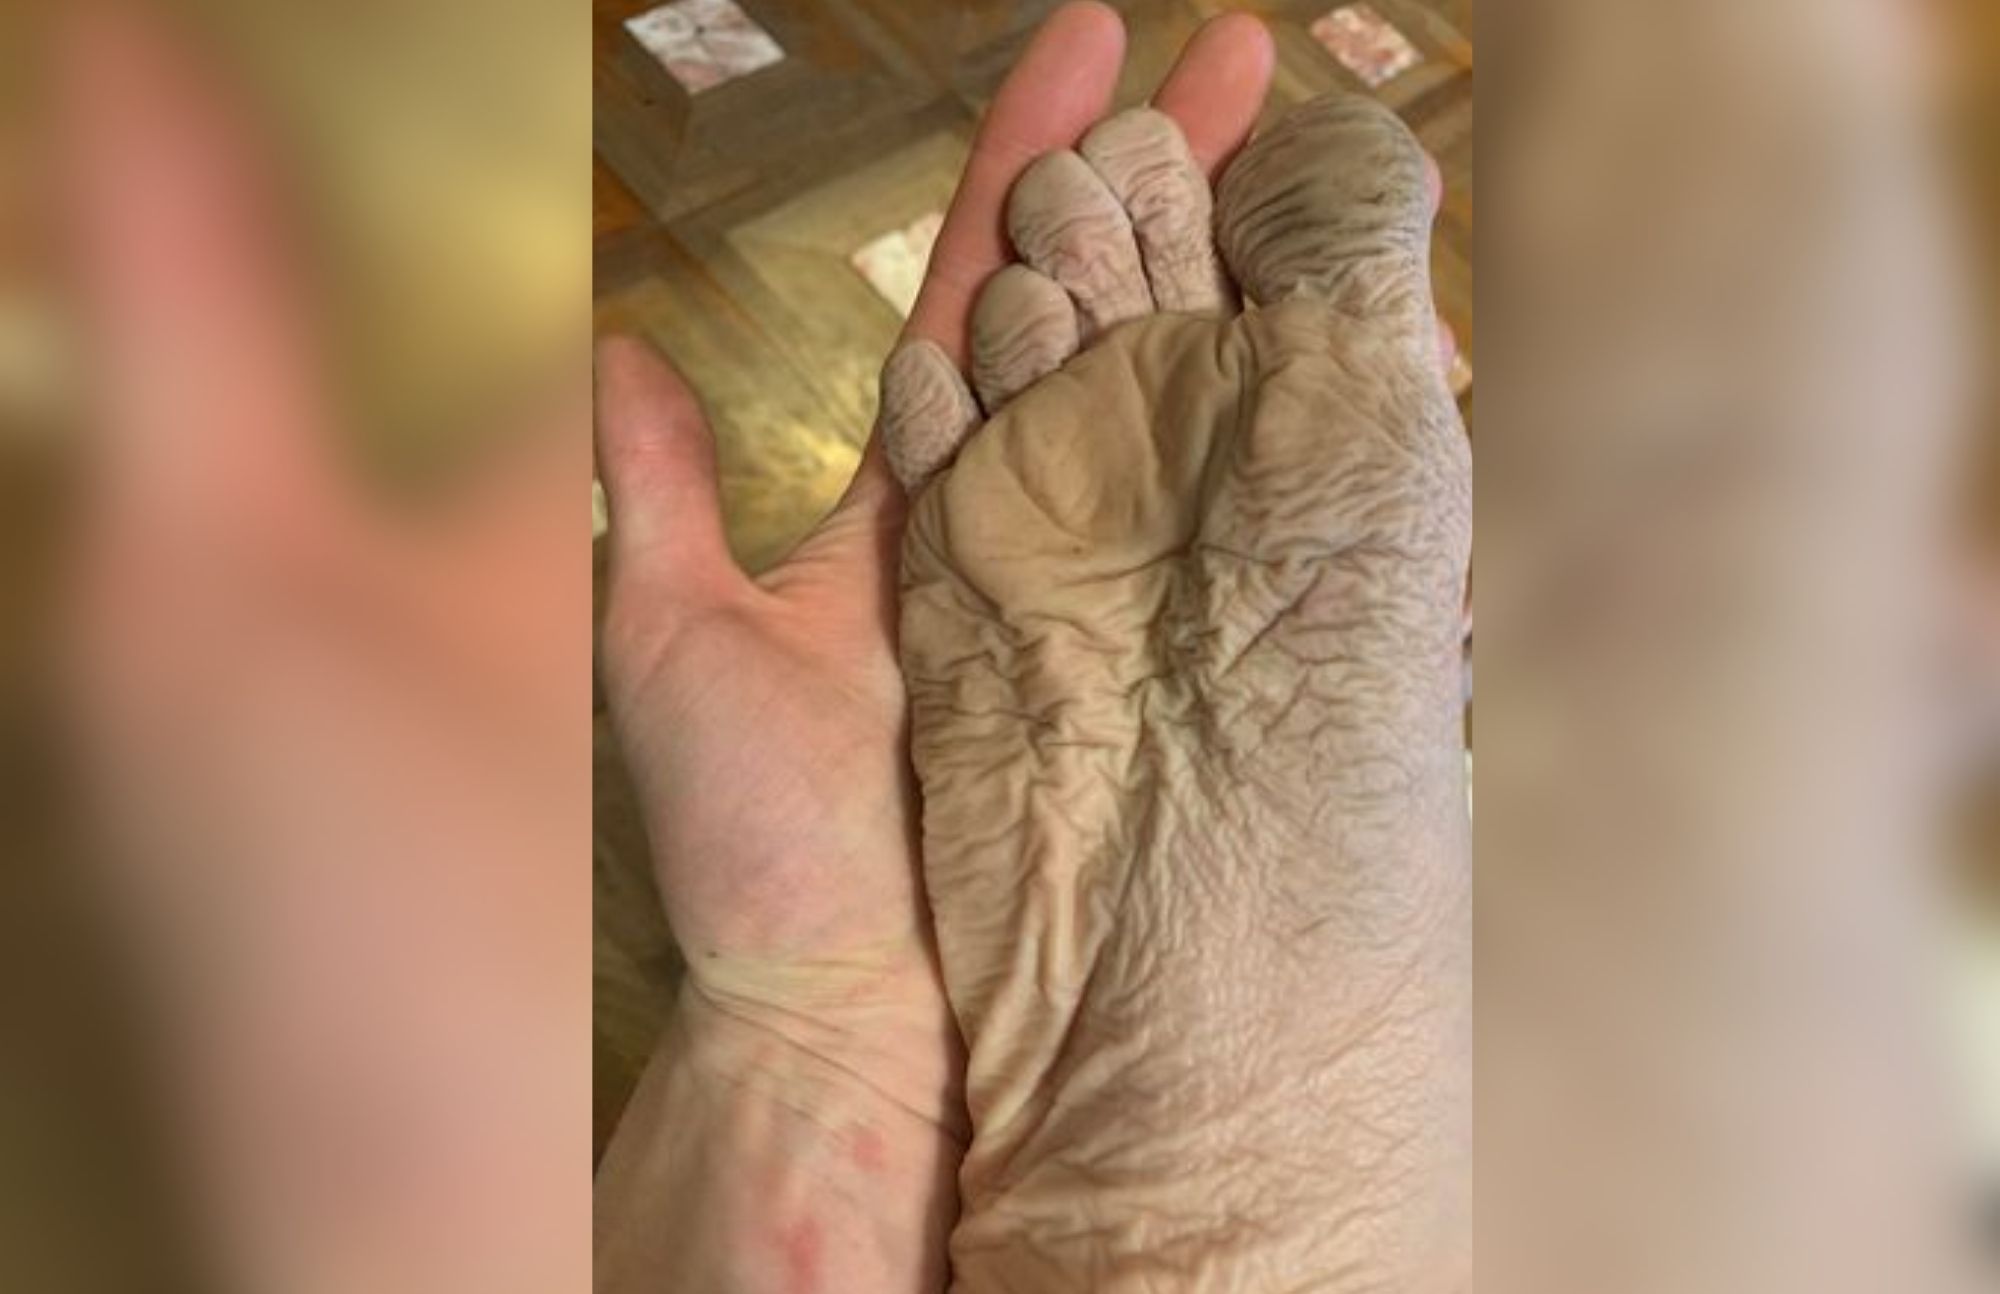 A foot that has wrinkled skin and is turning a light brown color